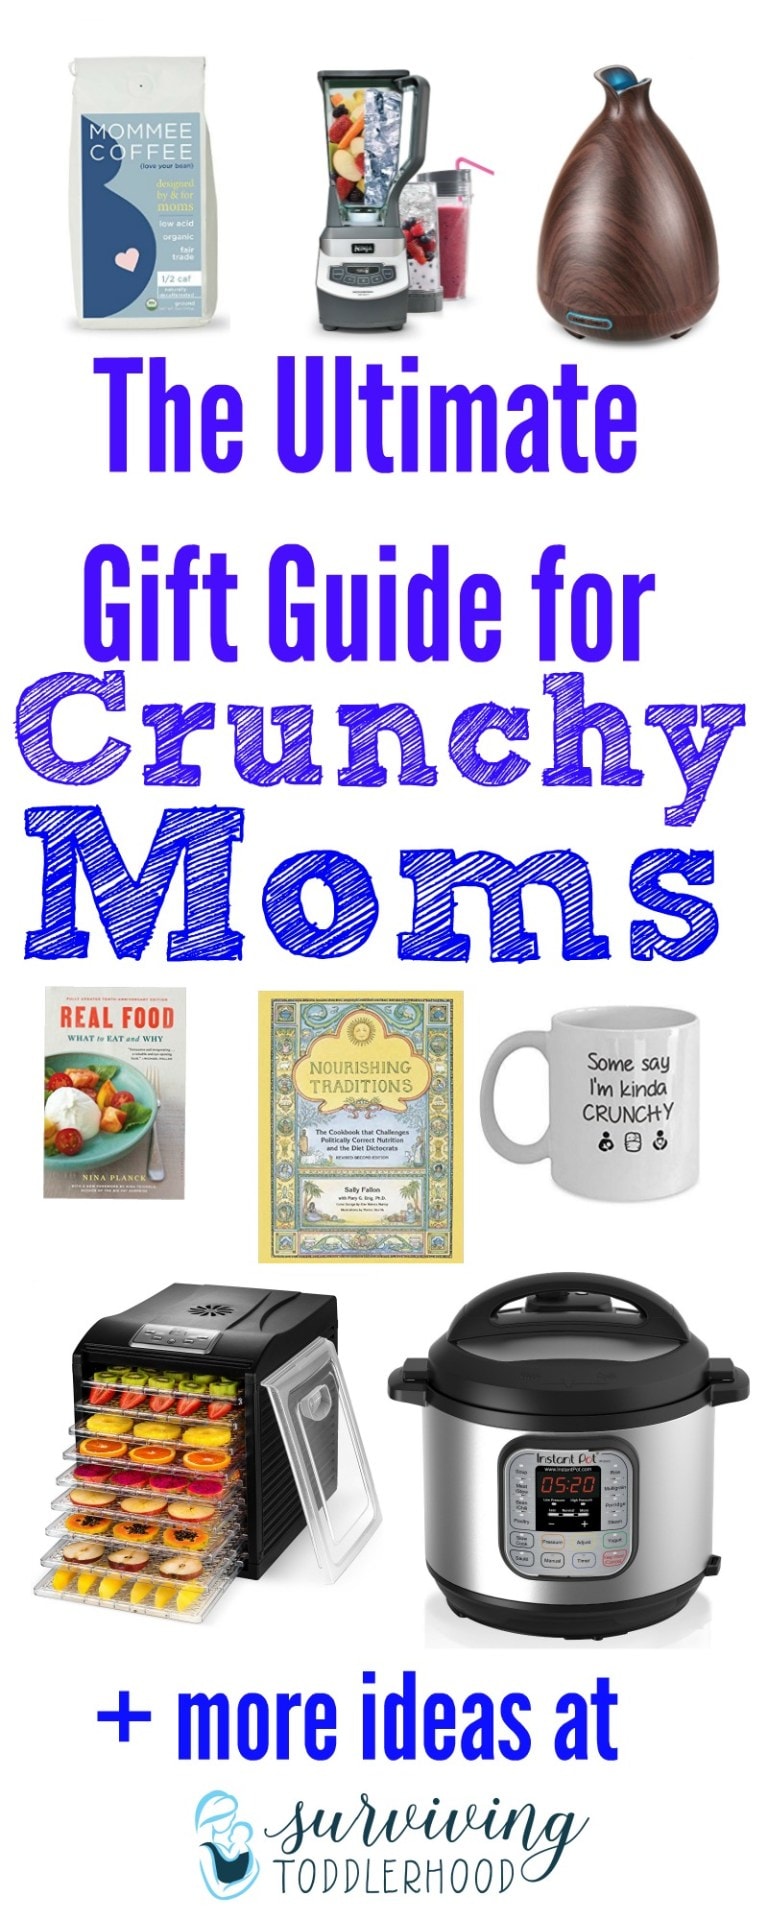 Gift guide example - with dehyrdator, books, blender, coffee cup, and instant pot